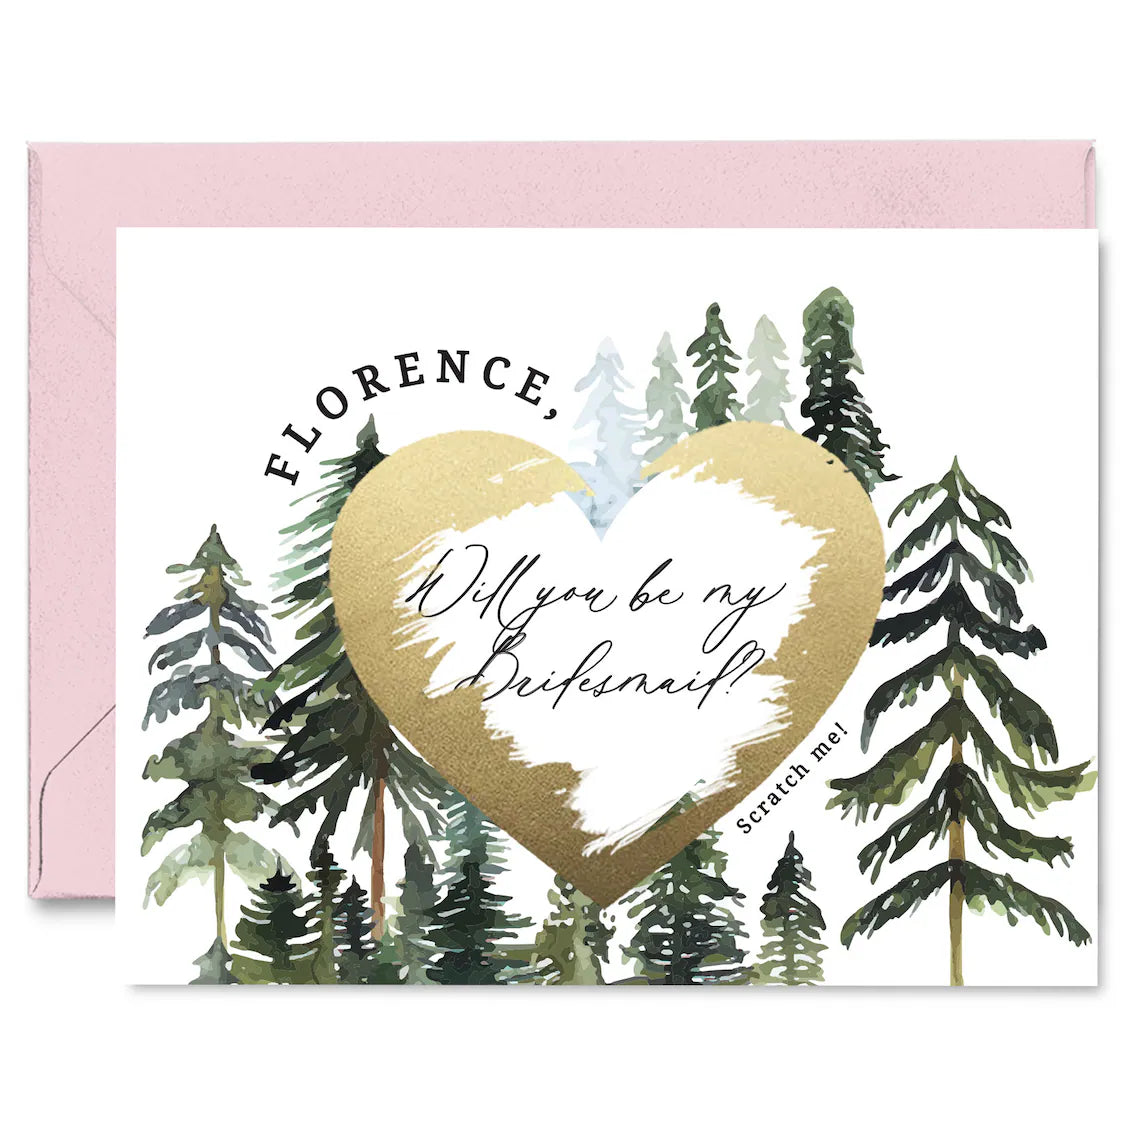 will you be my bridesmaid proposal card with rustic pine trees design and gold foiled cratch off heart in the middle. 